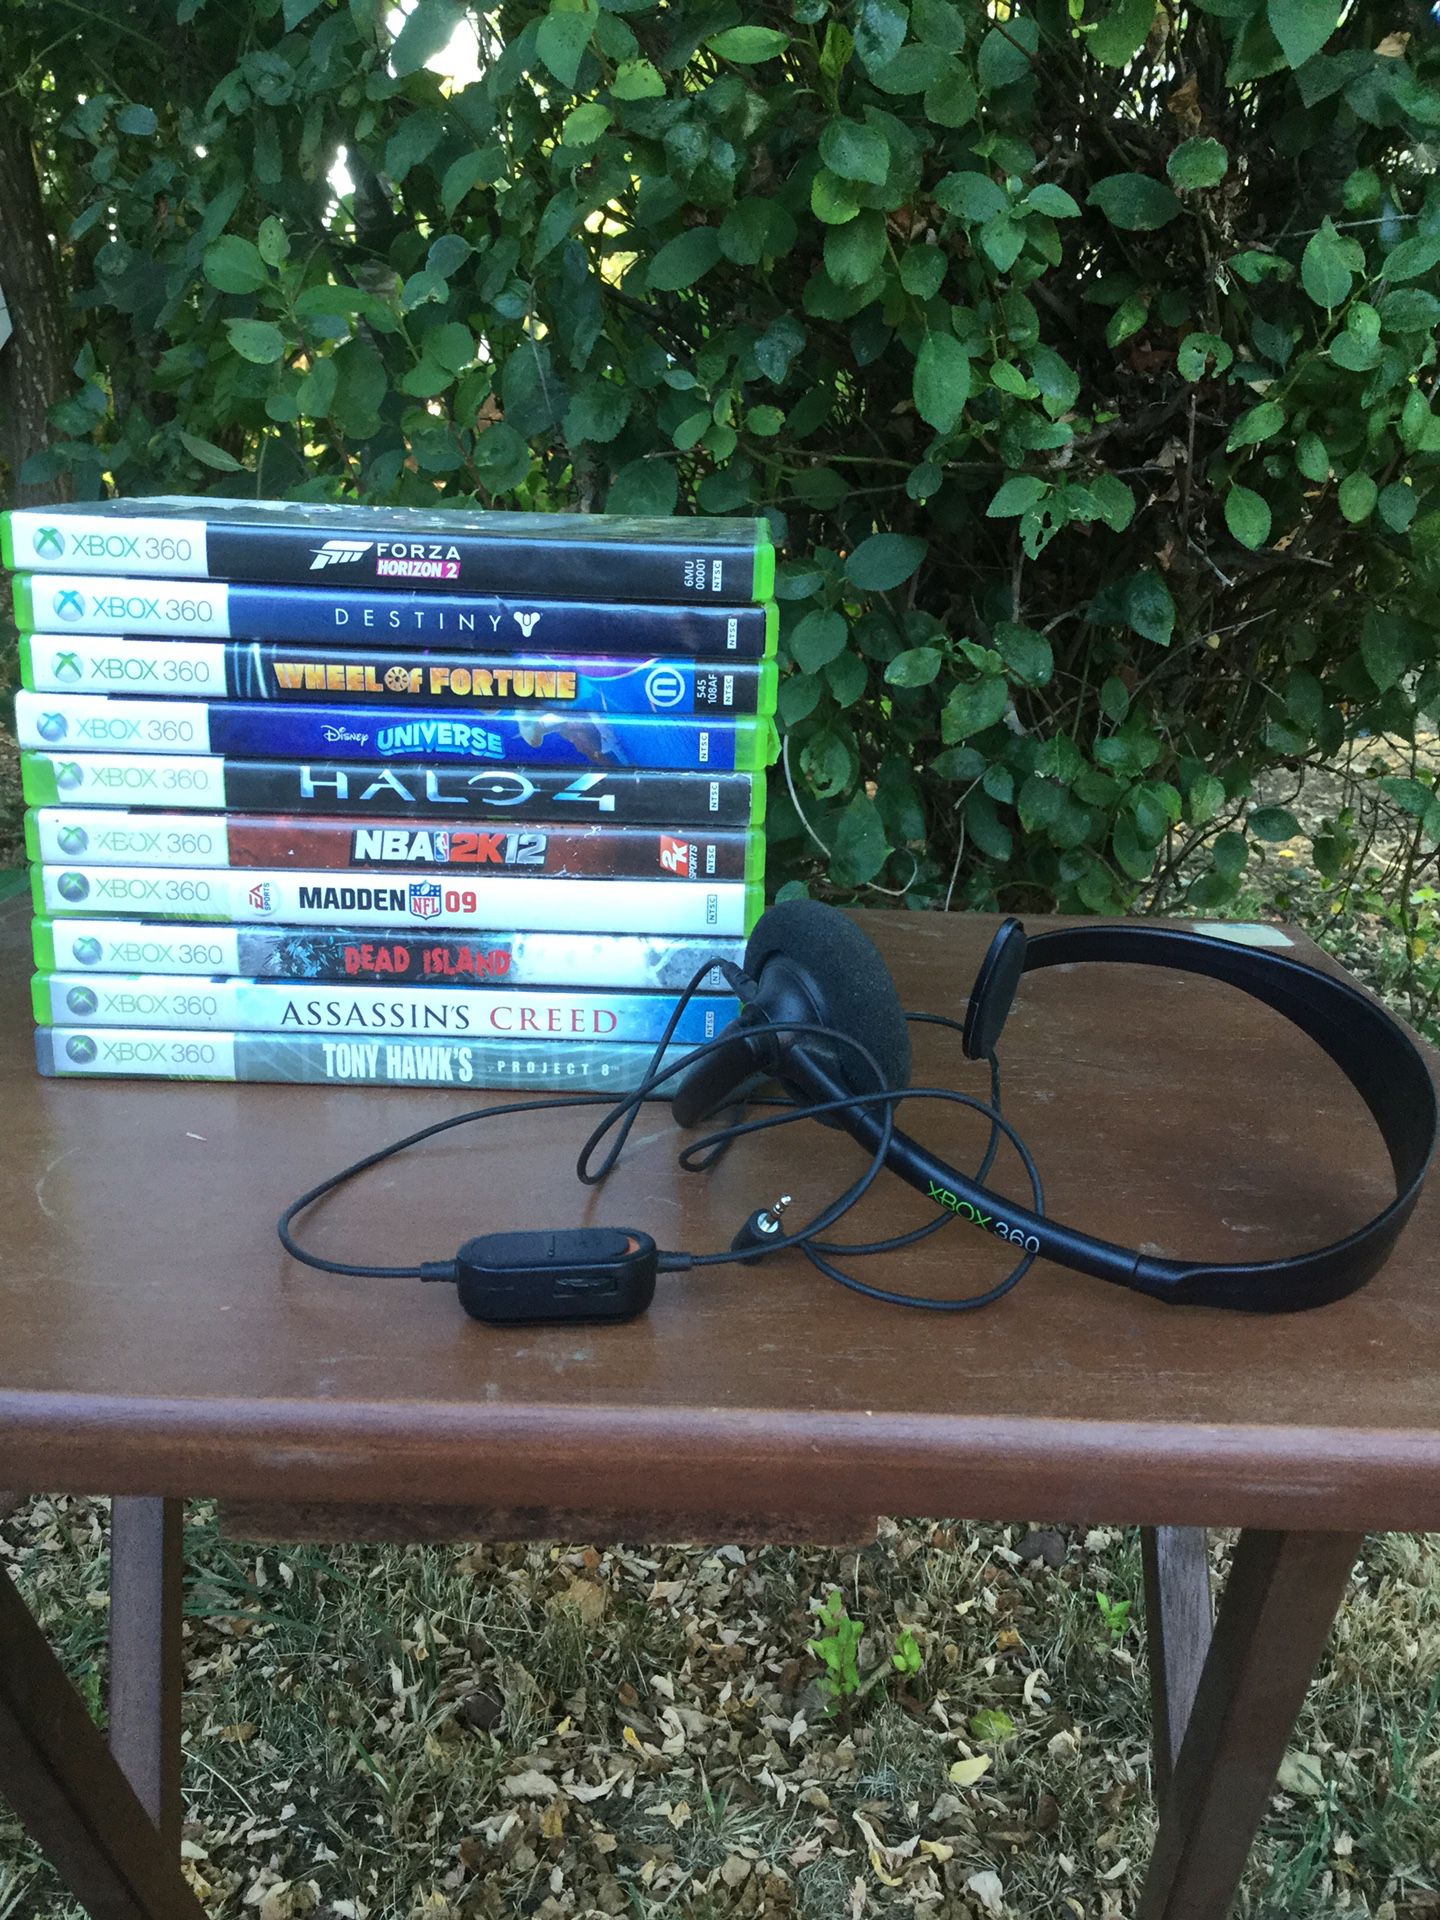 Xbox 360 games and headset